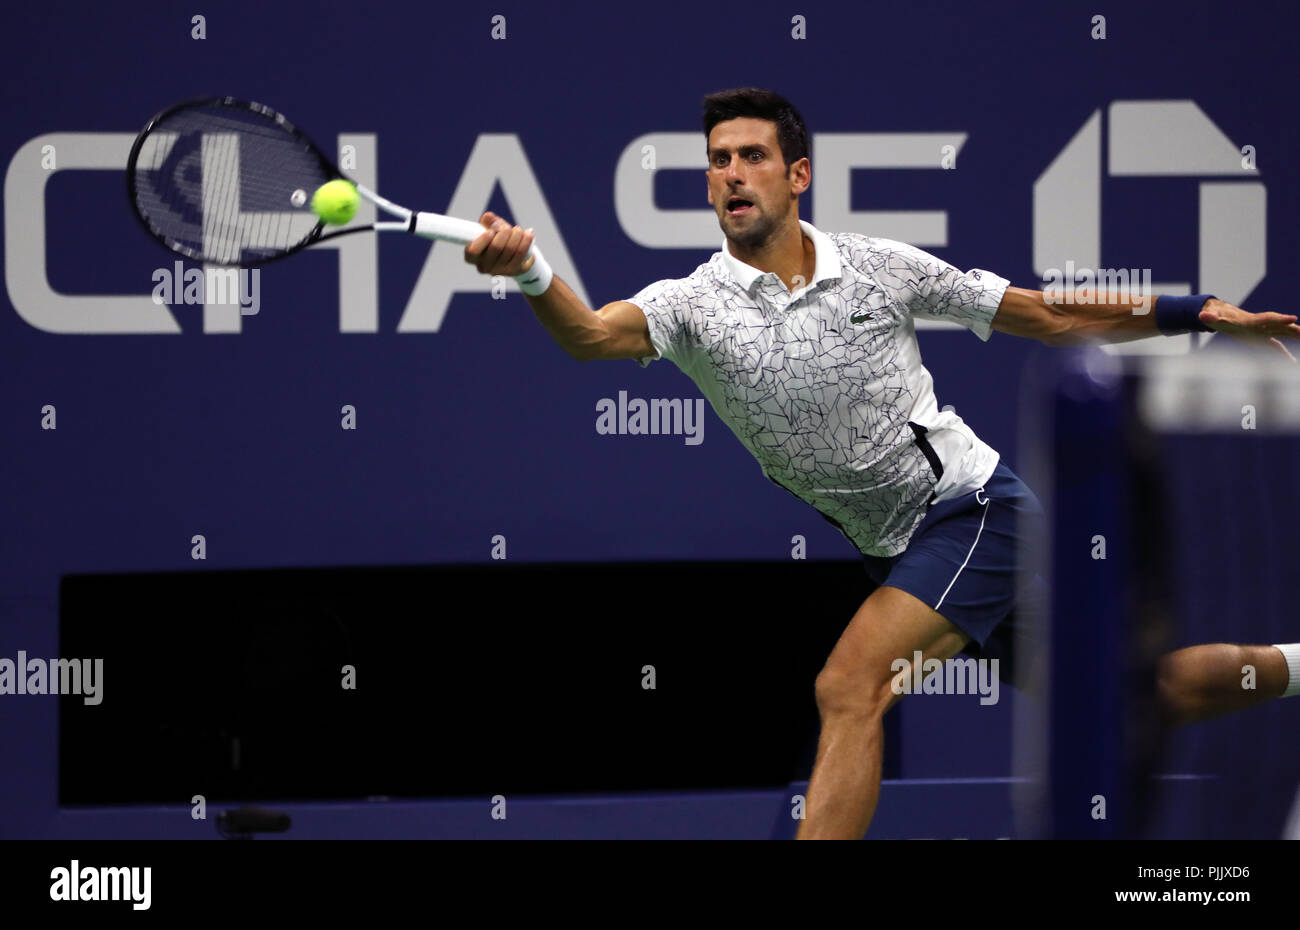 New York, USA. 7th September 2018.  US Open Tennis:  Novak Djokovic of Serbia in action against Japan's Kei Nishikori during their semifinal match at the US Open in Flushing Meadows, New York. Djokovic won the match and will face Juan Martin del Potro of Argentina in Sunday's final. Credit: Adam Stoltman/Alamy Live News Stock Photo